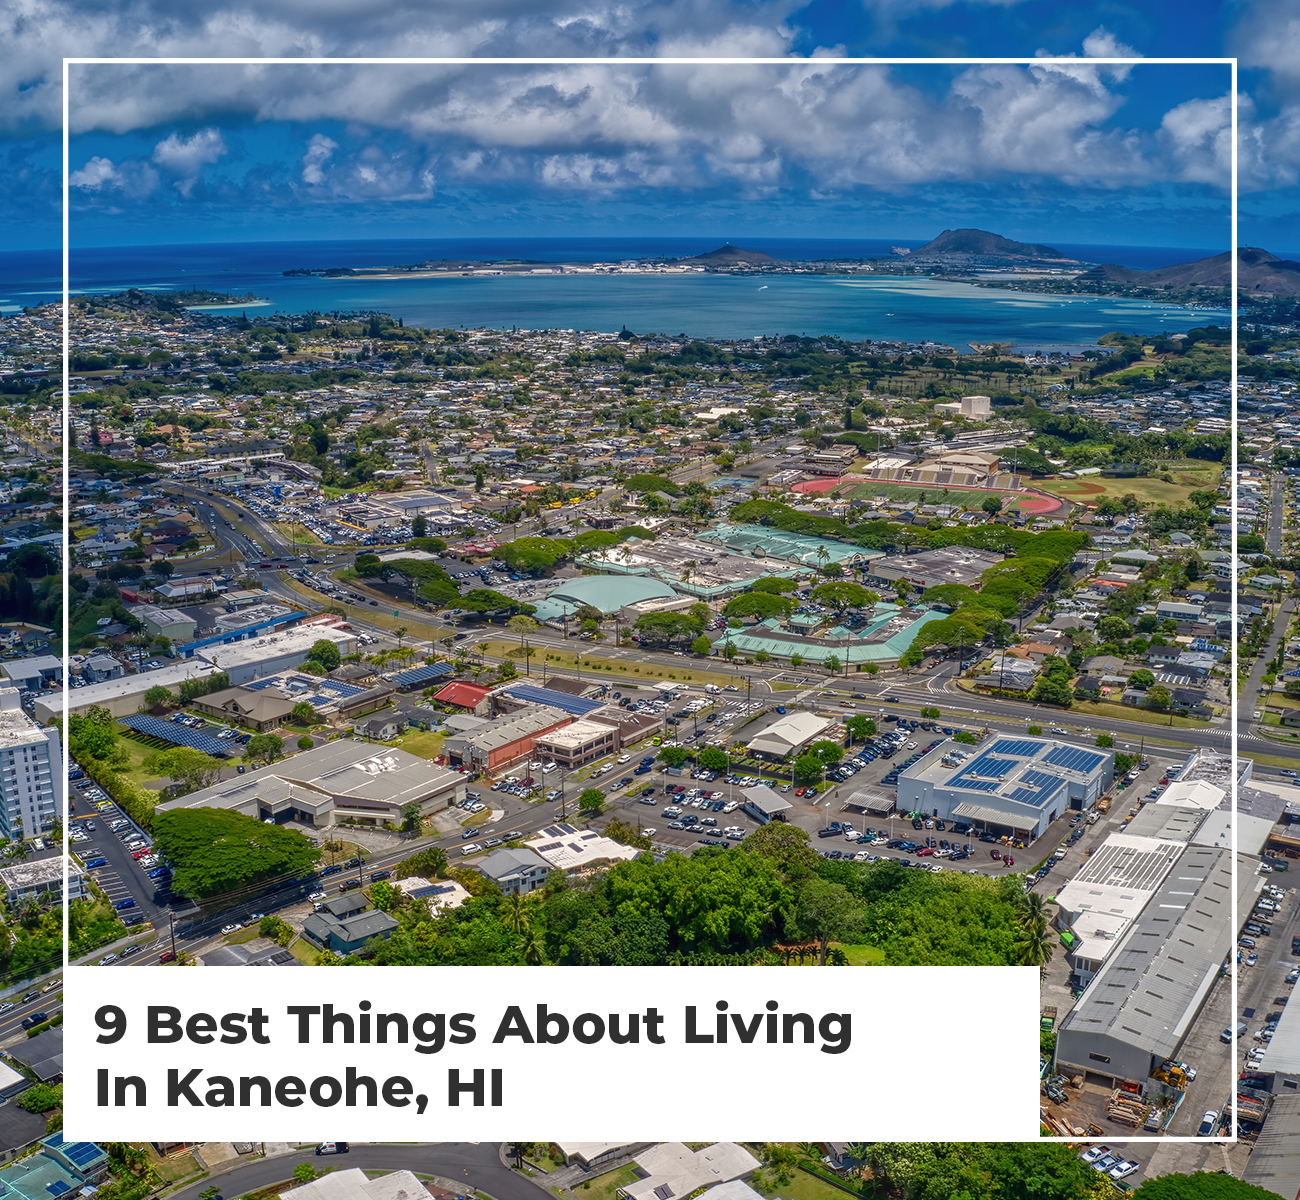 9 Best Things About Living In Kaneohe, HI